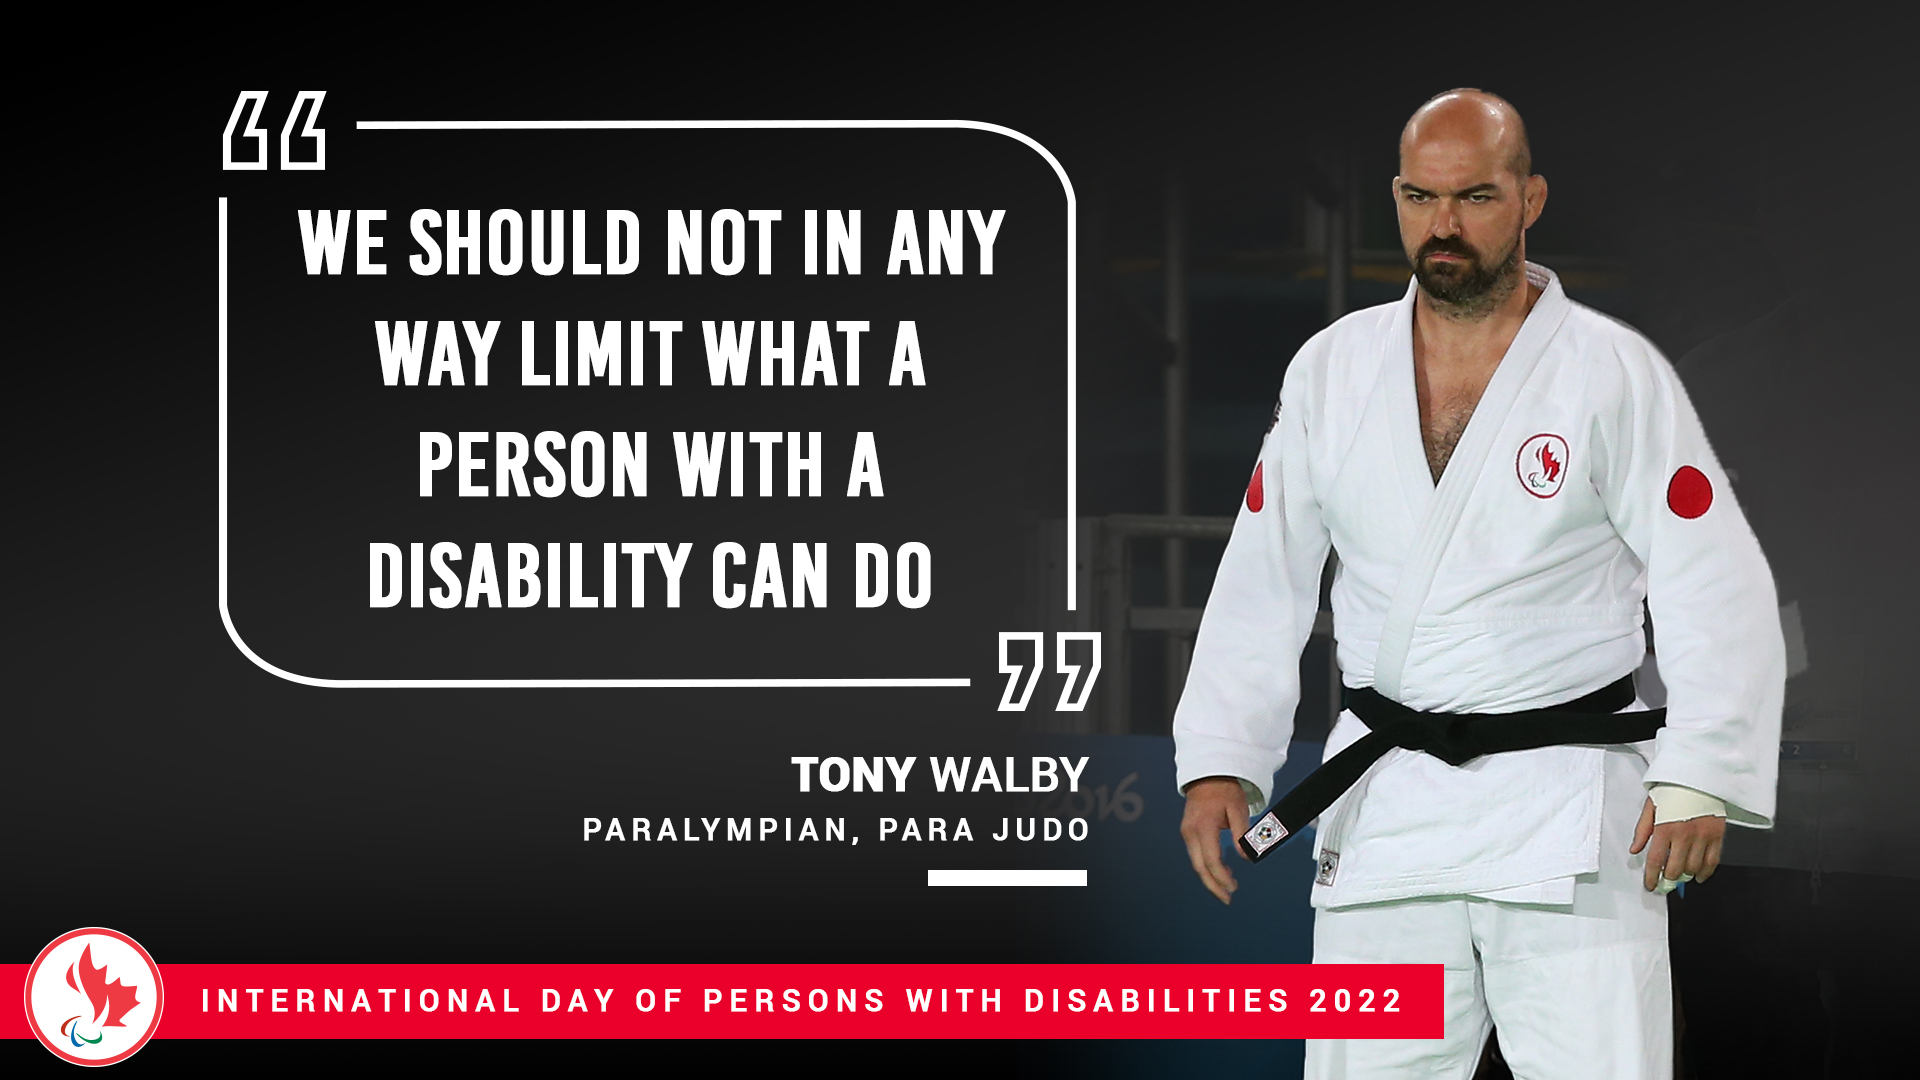 An image of Para judoka Tony Walby getting ready for a match with the quote "We should not in any way limit what a person with a disability can do" 